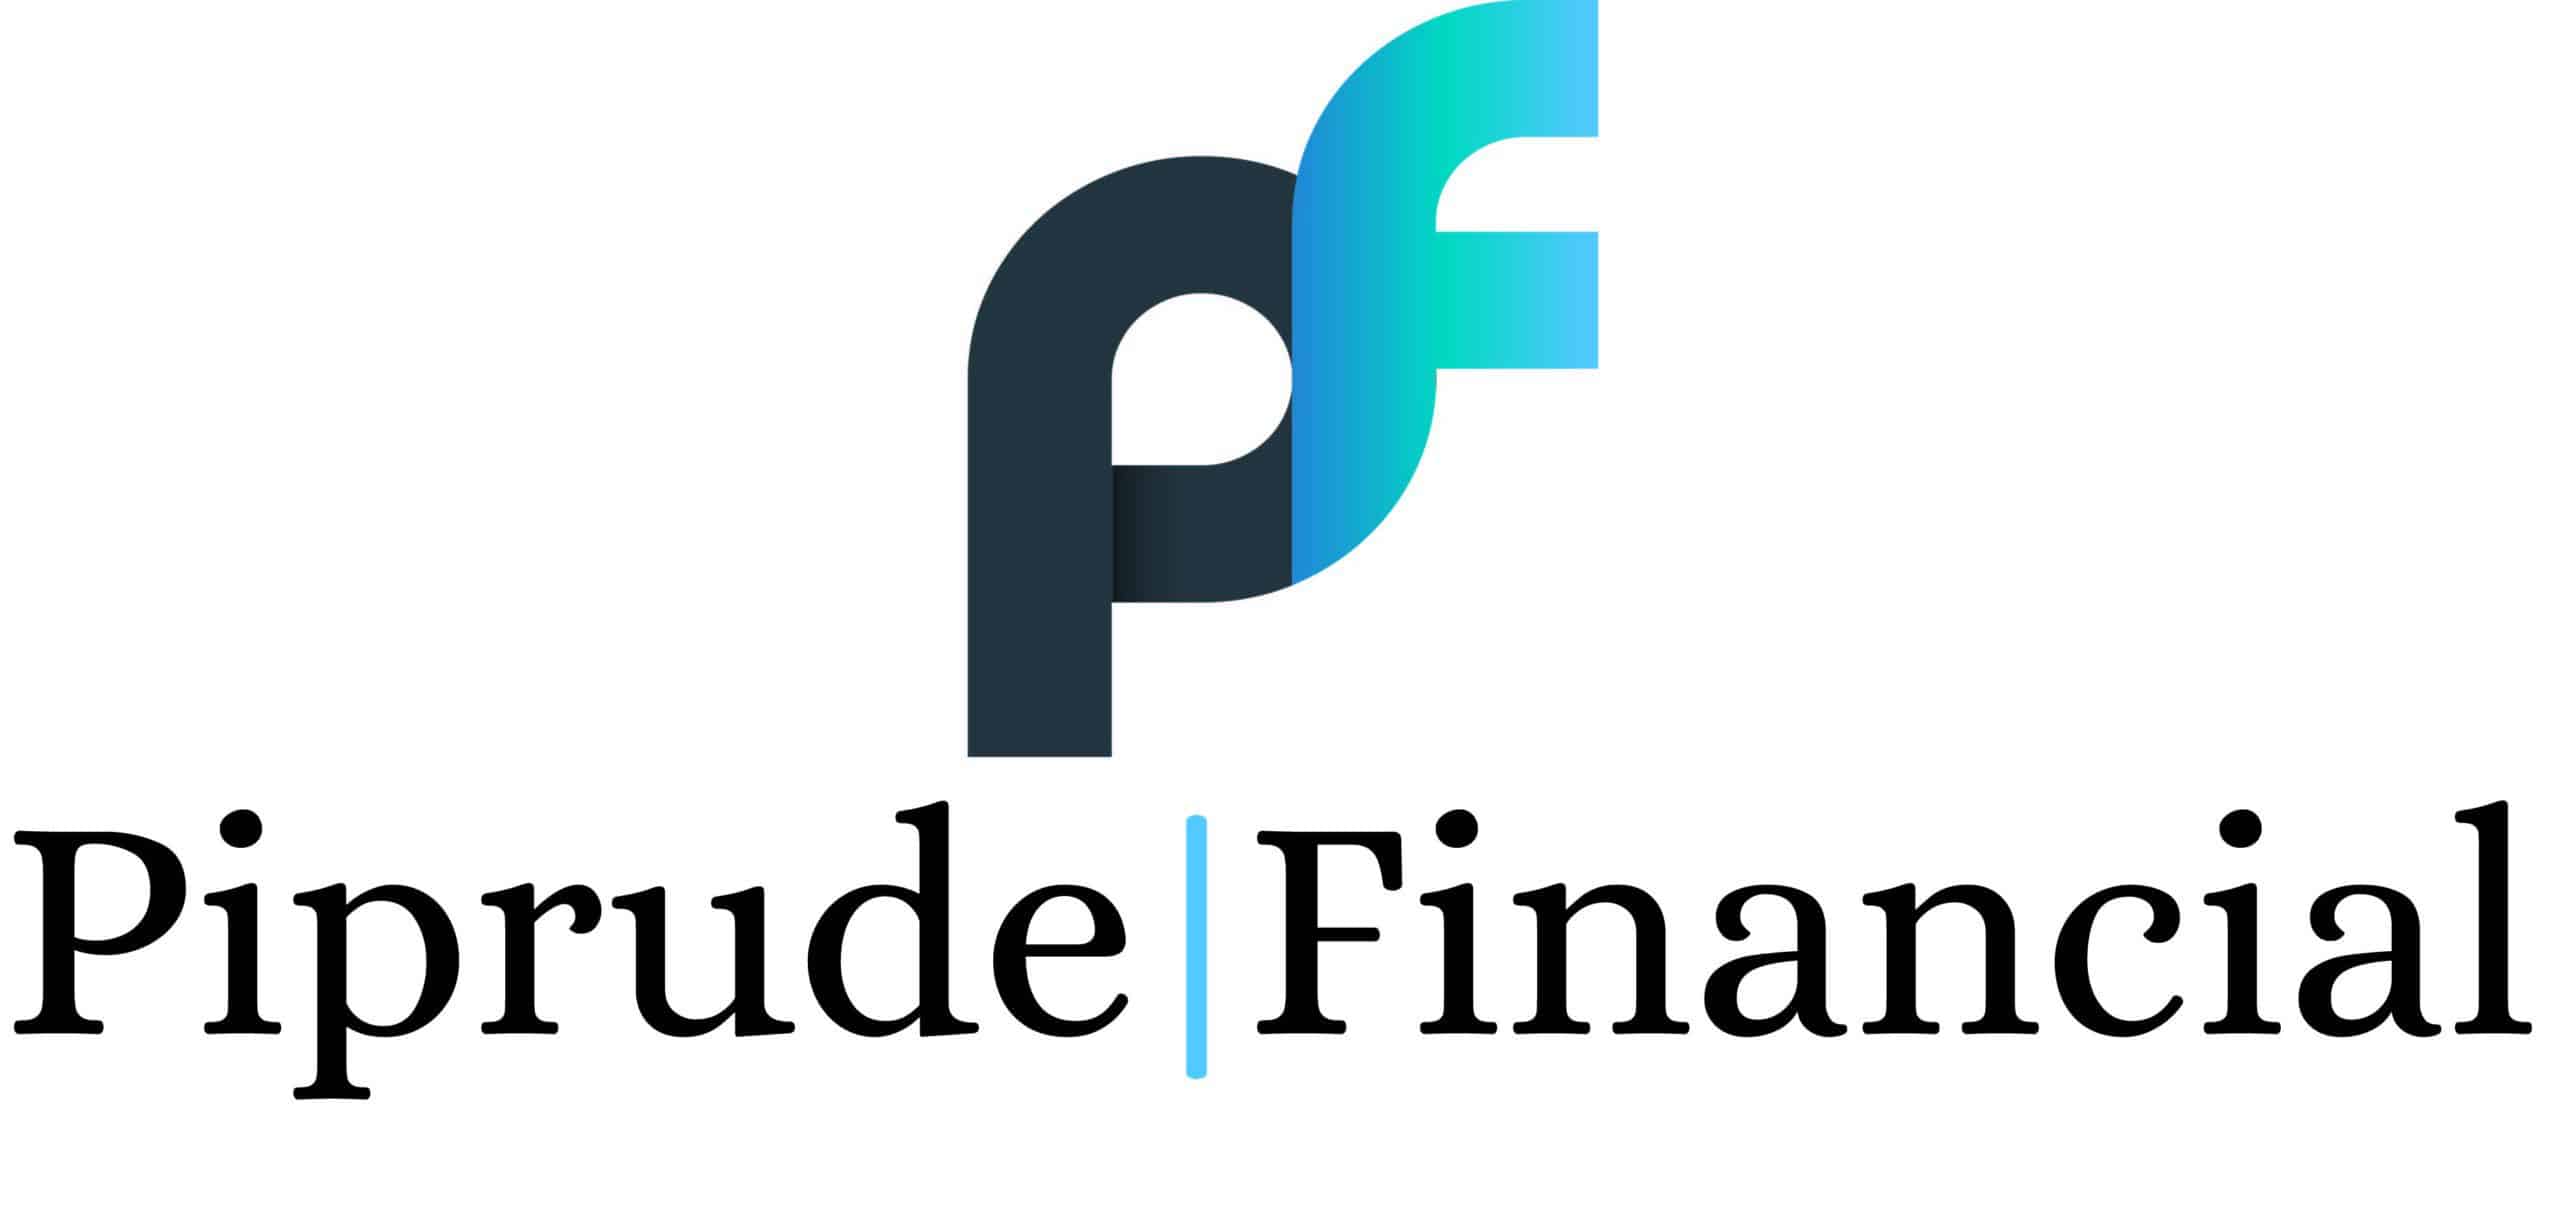 Piprude Financial